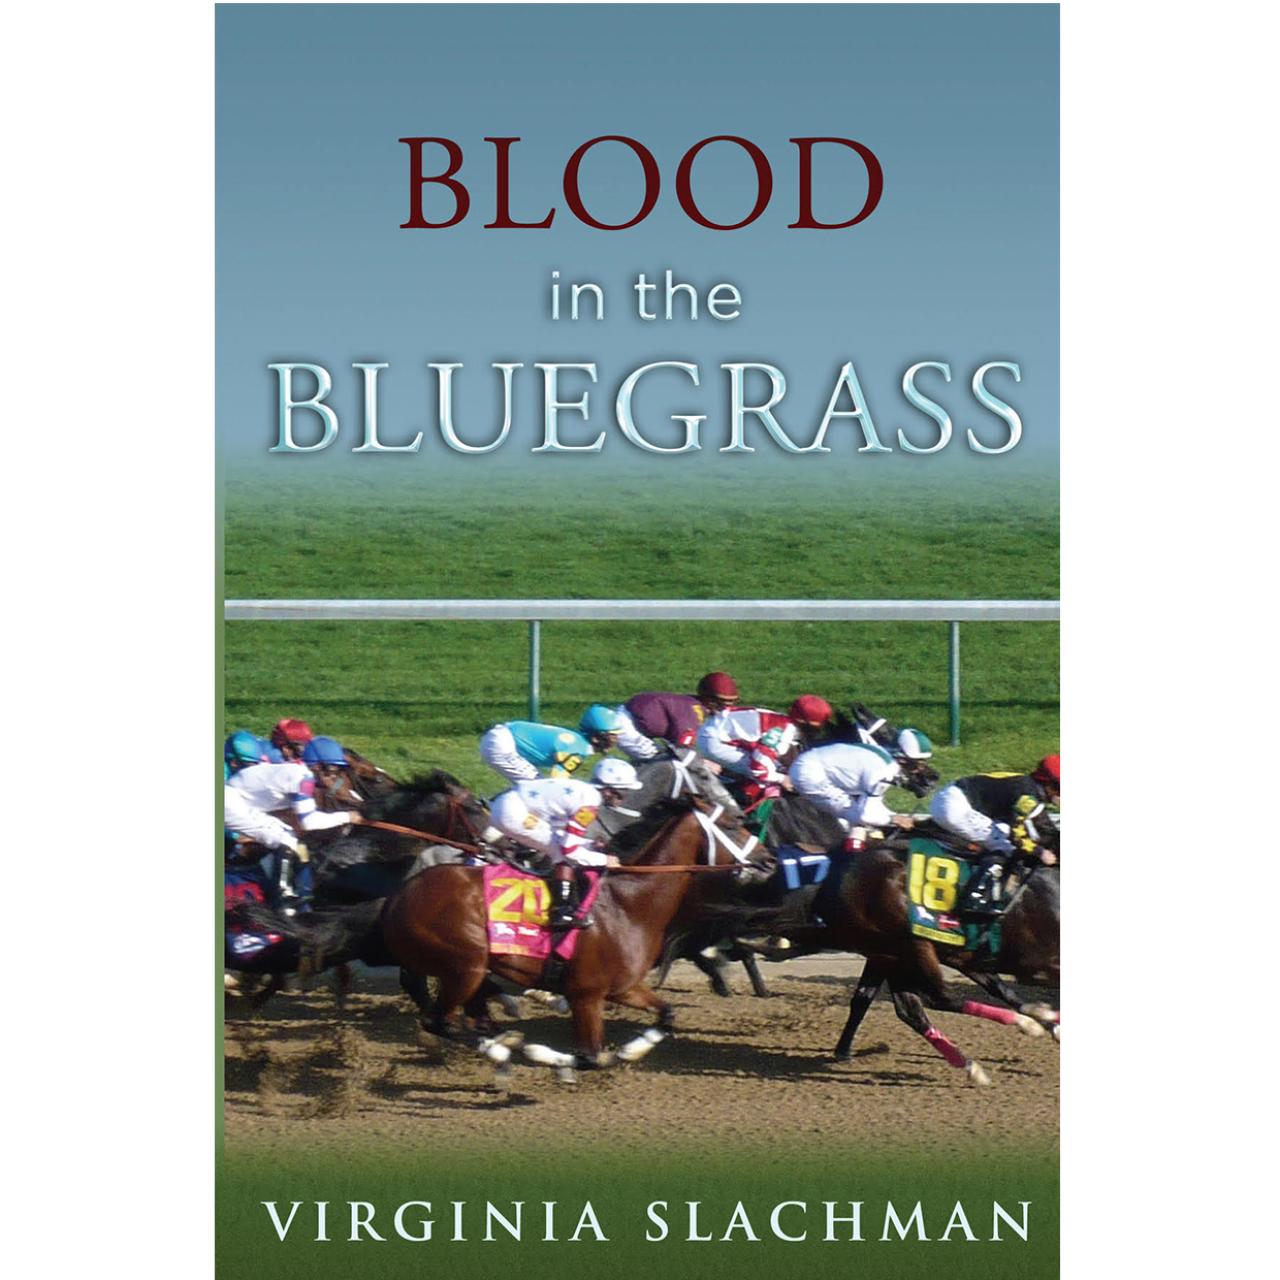 Blood in the Bluegrass